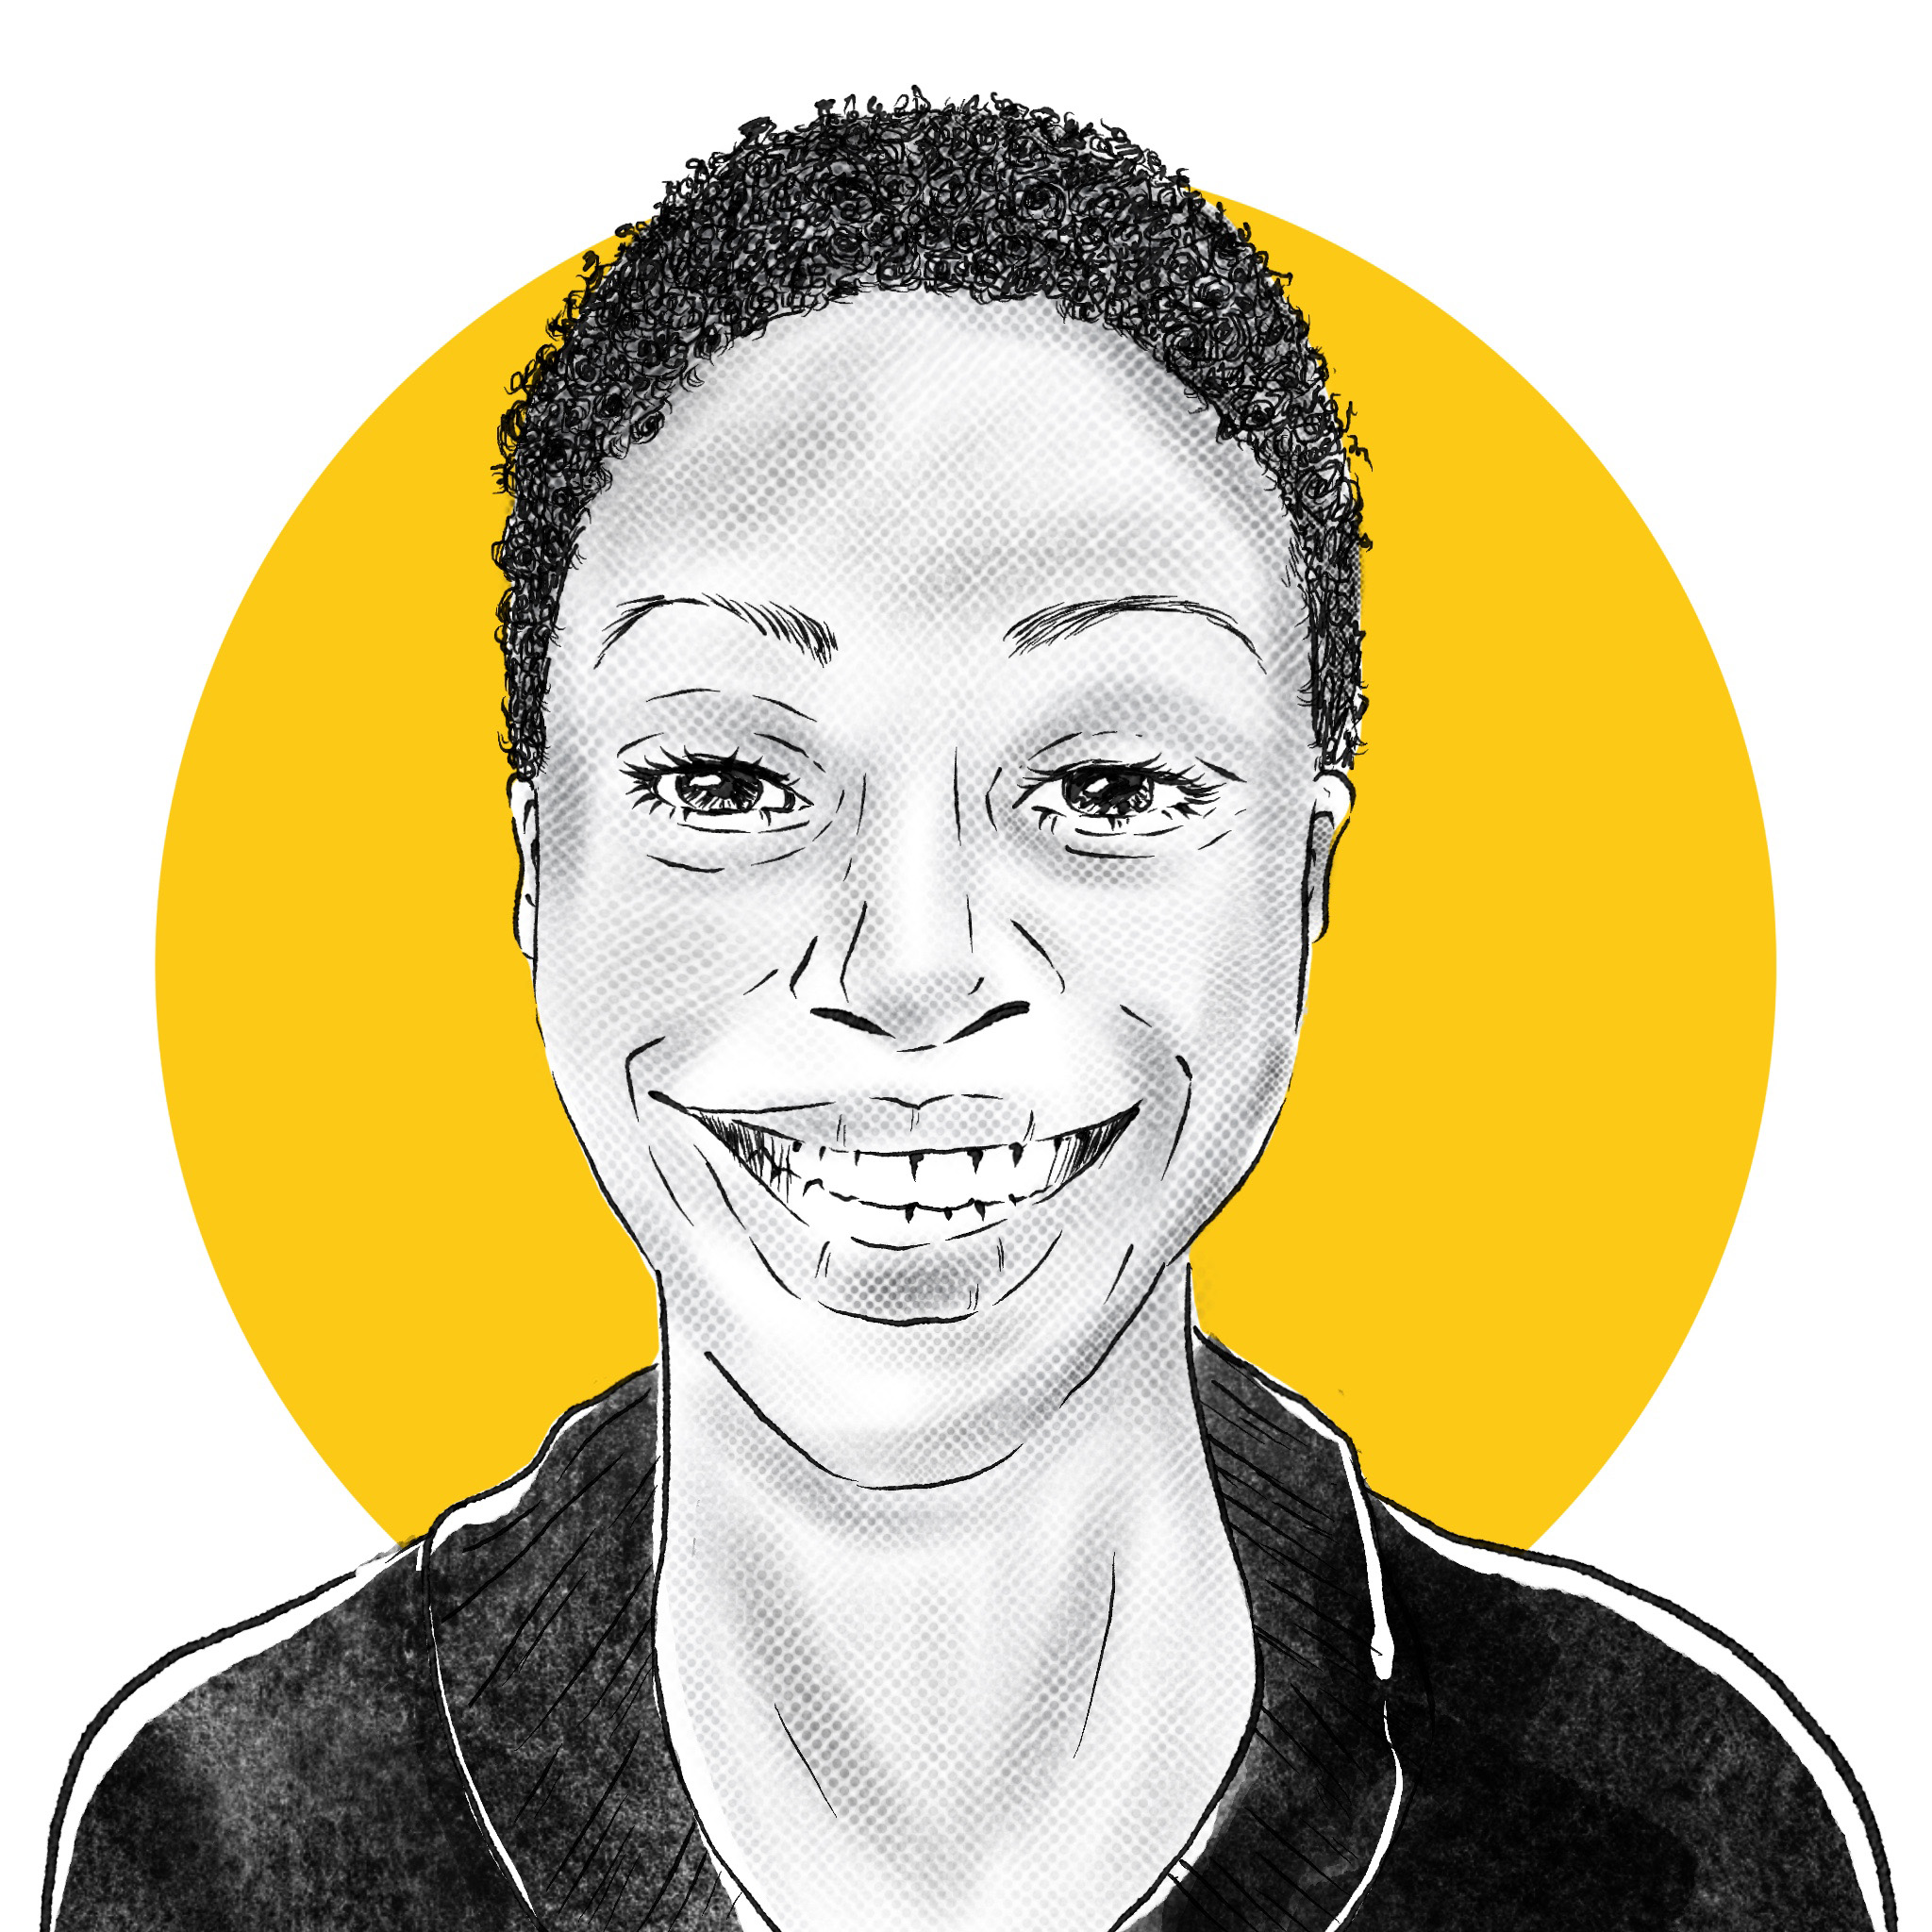 A black and white, pen and ink digital portrait of Shani Buggs. There is a large yellow dot behind the drawing.